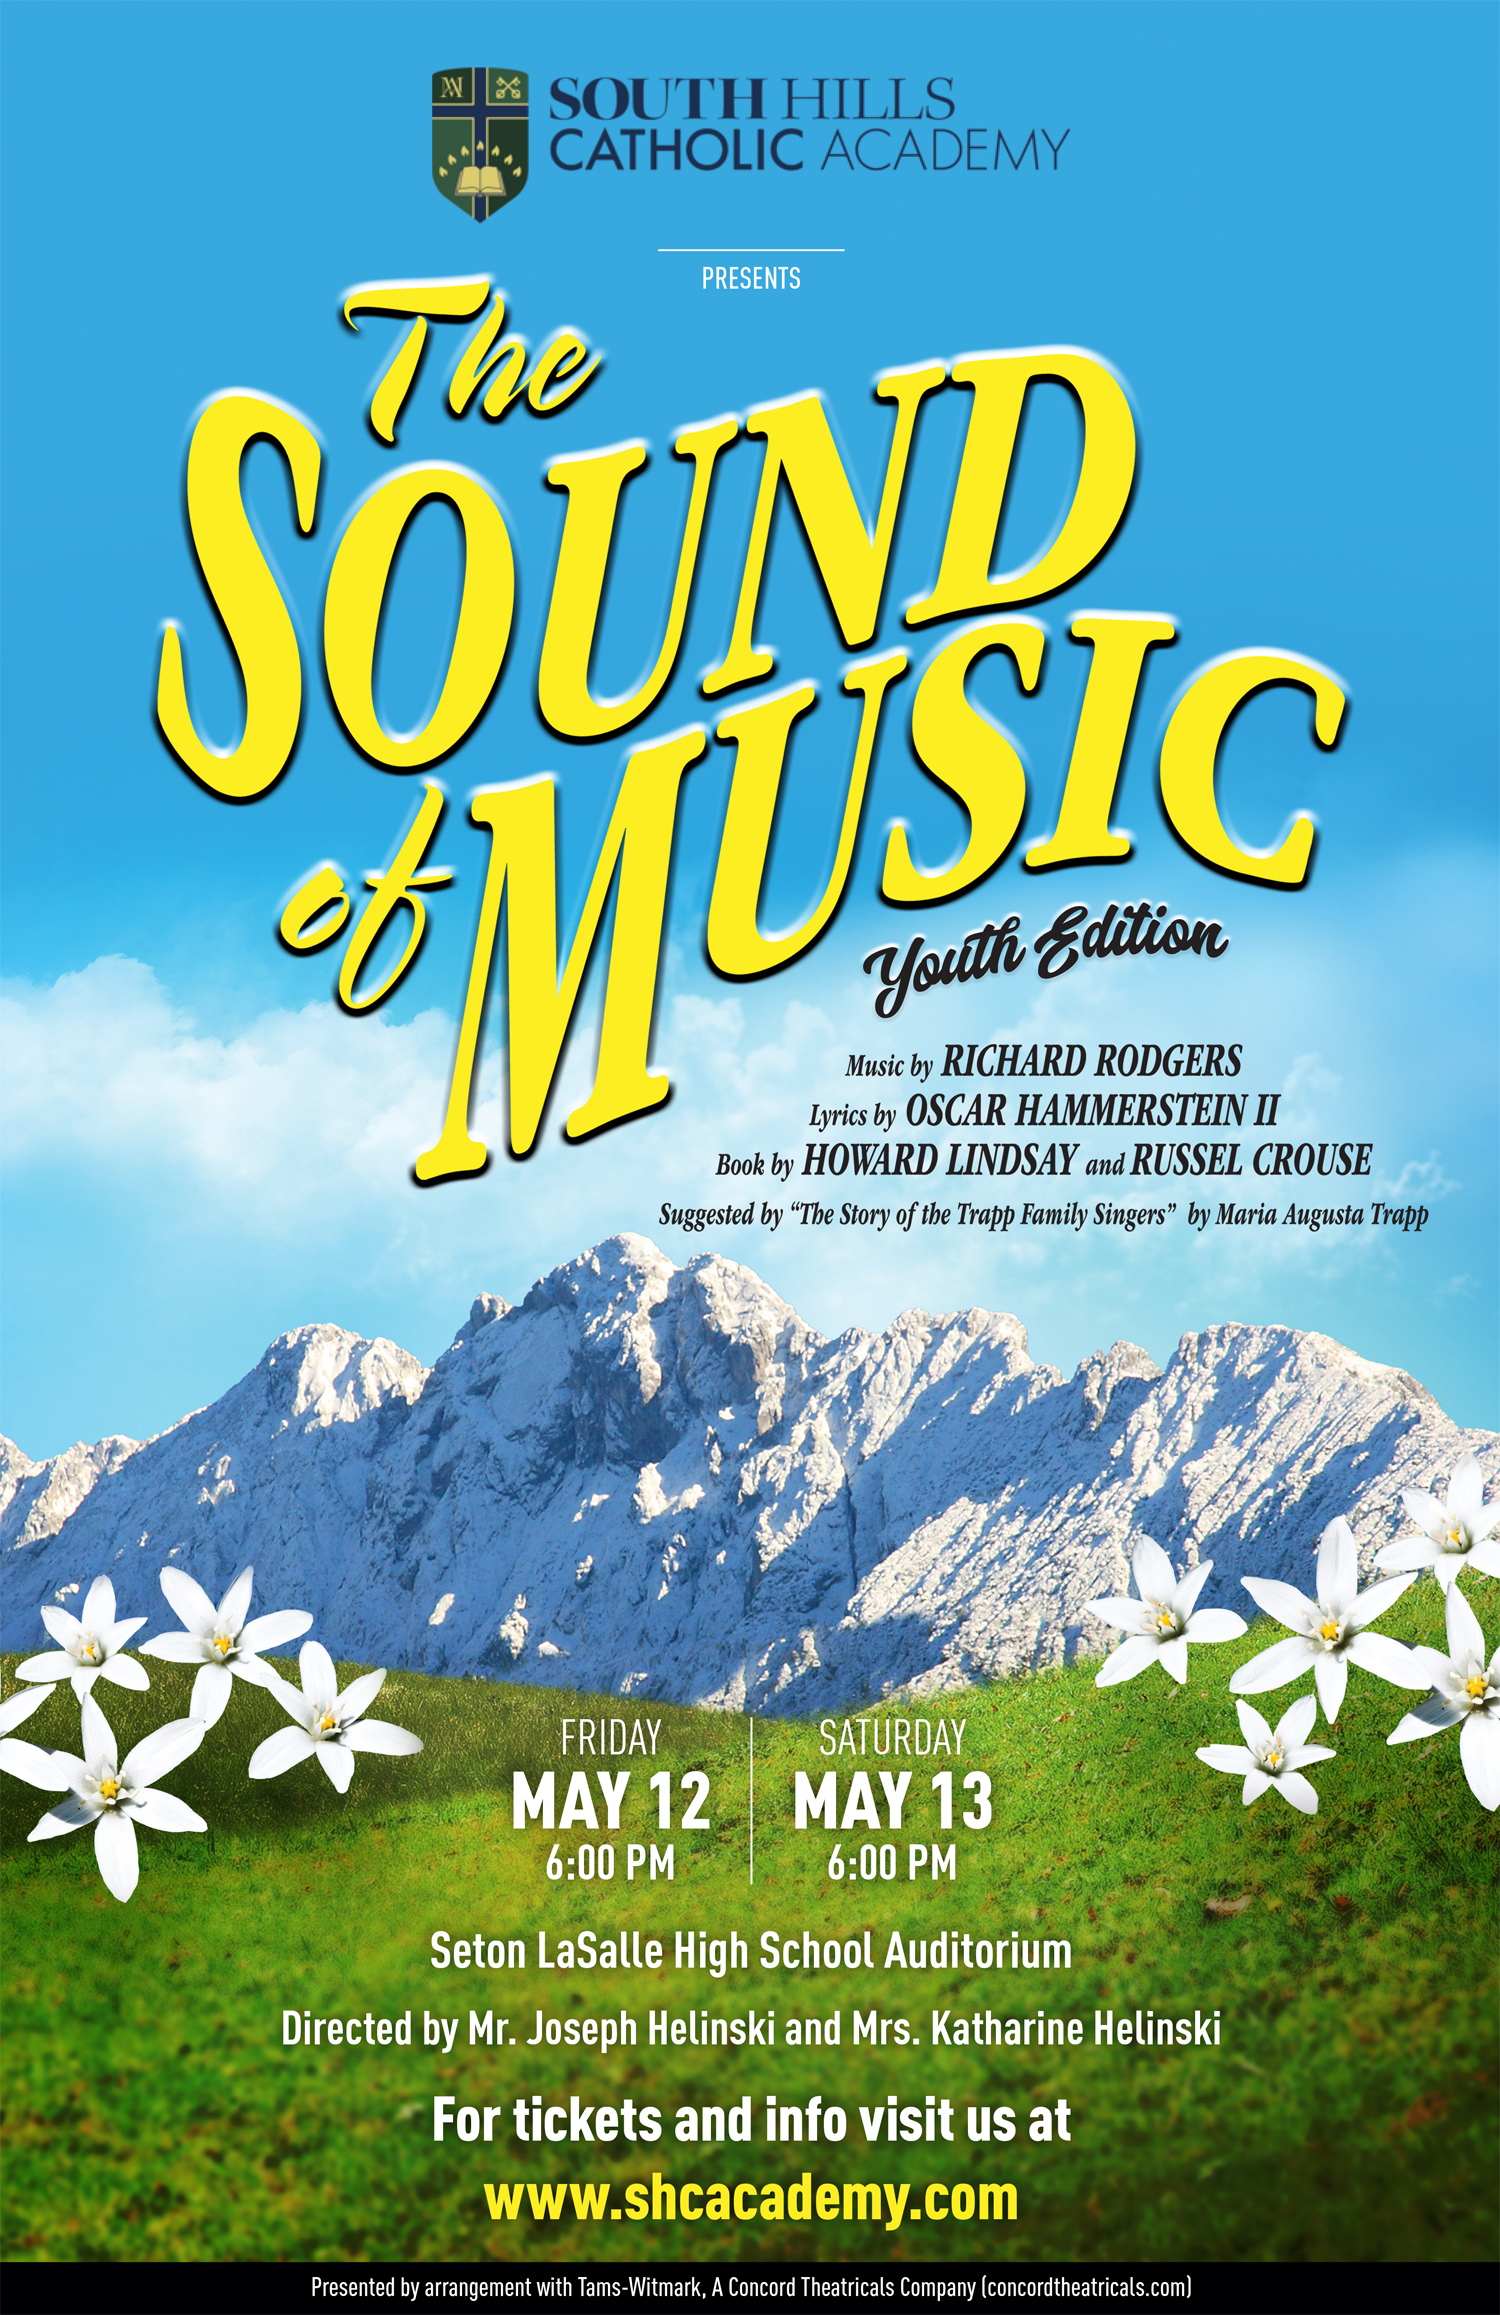 South Hills Catholic Academy Presents, "The Sound of Music-Youth Edition"